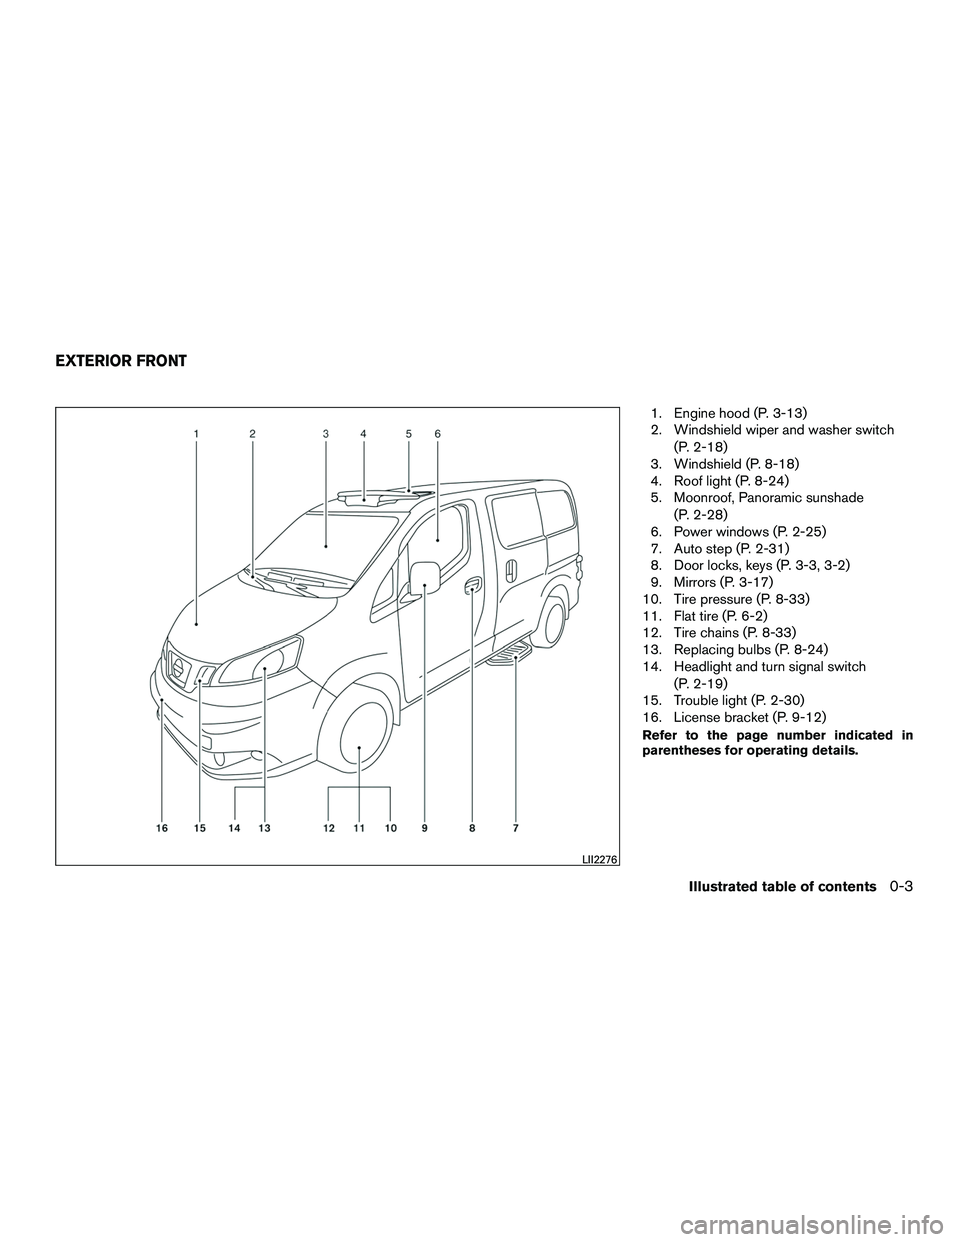 NISSAN NV200 2016  Owners Manual 1. Engine hood (P. 3-13)
2. Windshield wiper and washer switch(P. 2-18)
3. Windshield (P. 8-18)
4. Roof light (P. 8-24)
5. Moonroof, Panoramic sunshade
(P. 2-28)
6. Power windows (P. 2-25)
7. Auto ste